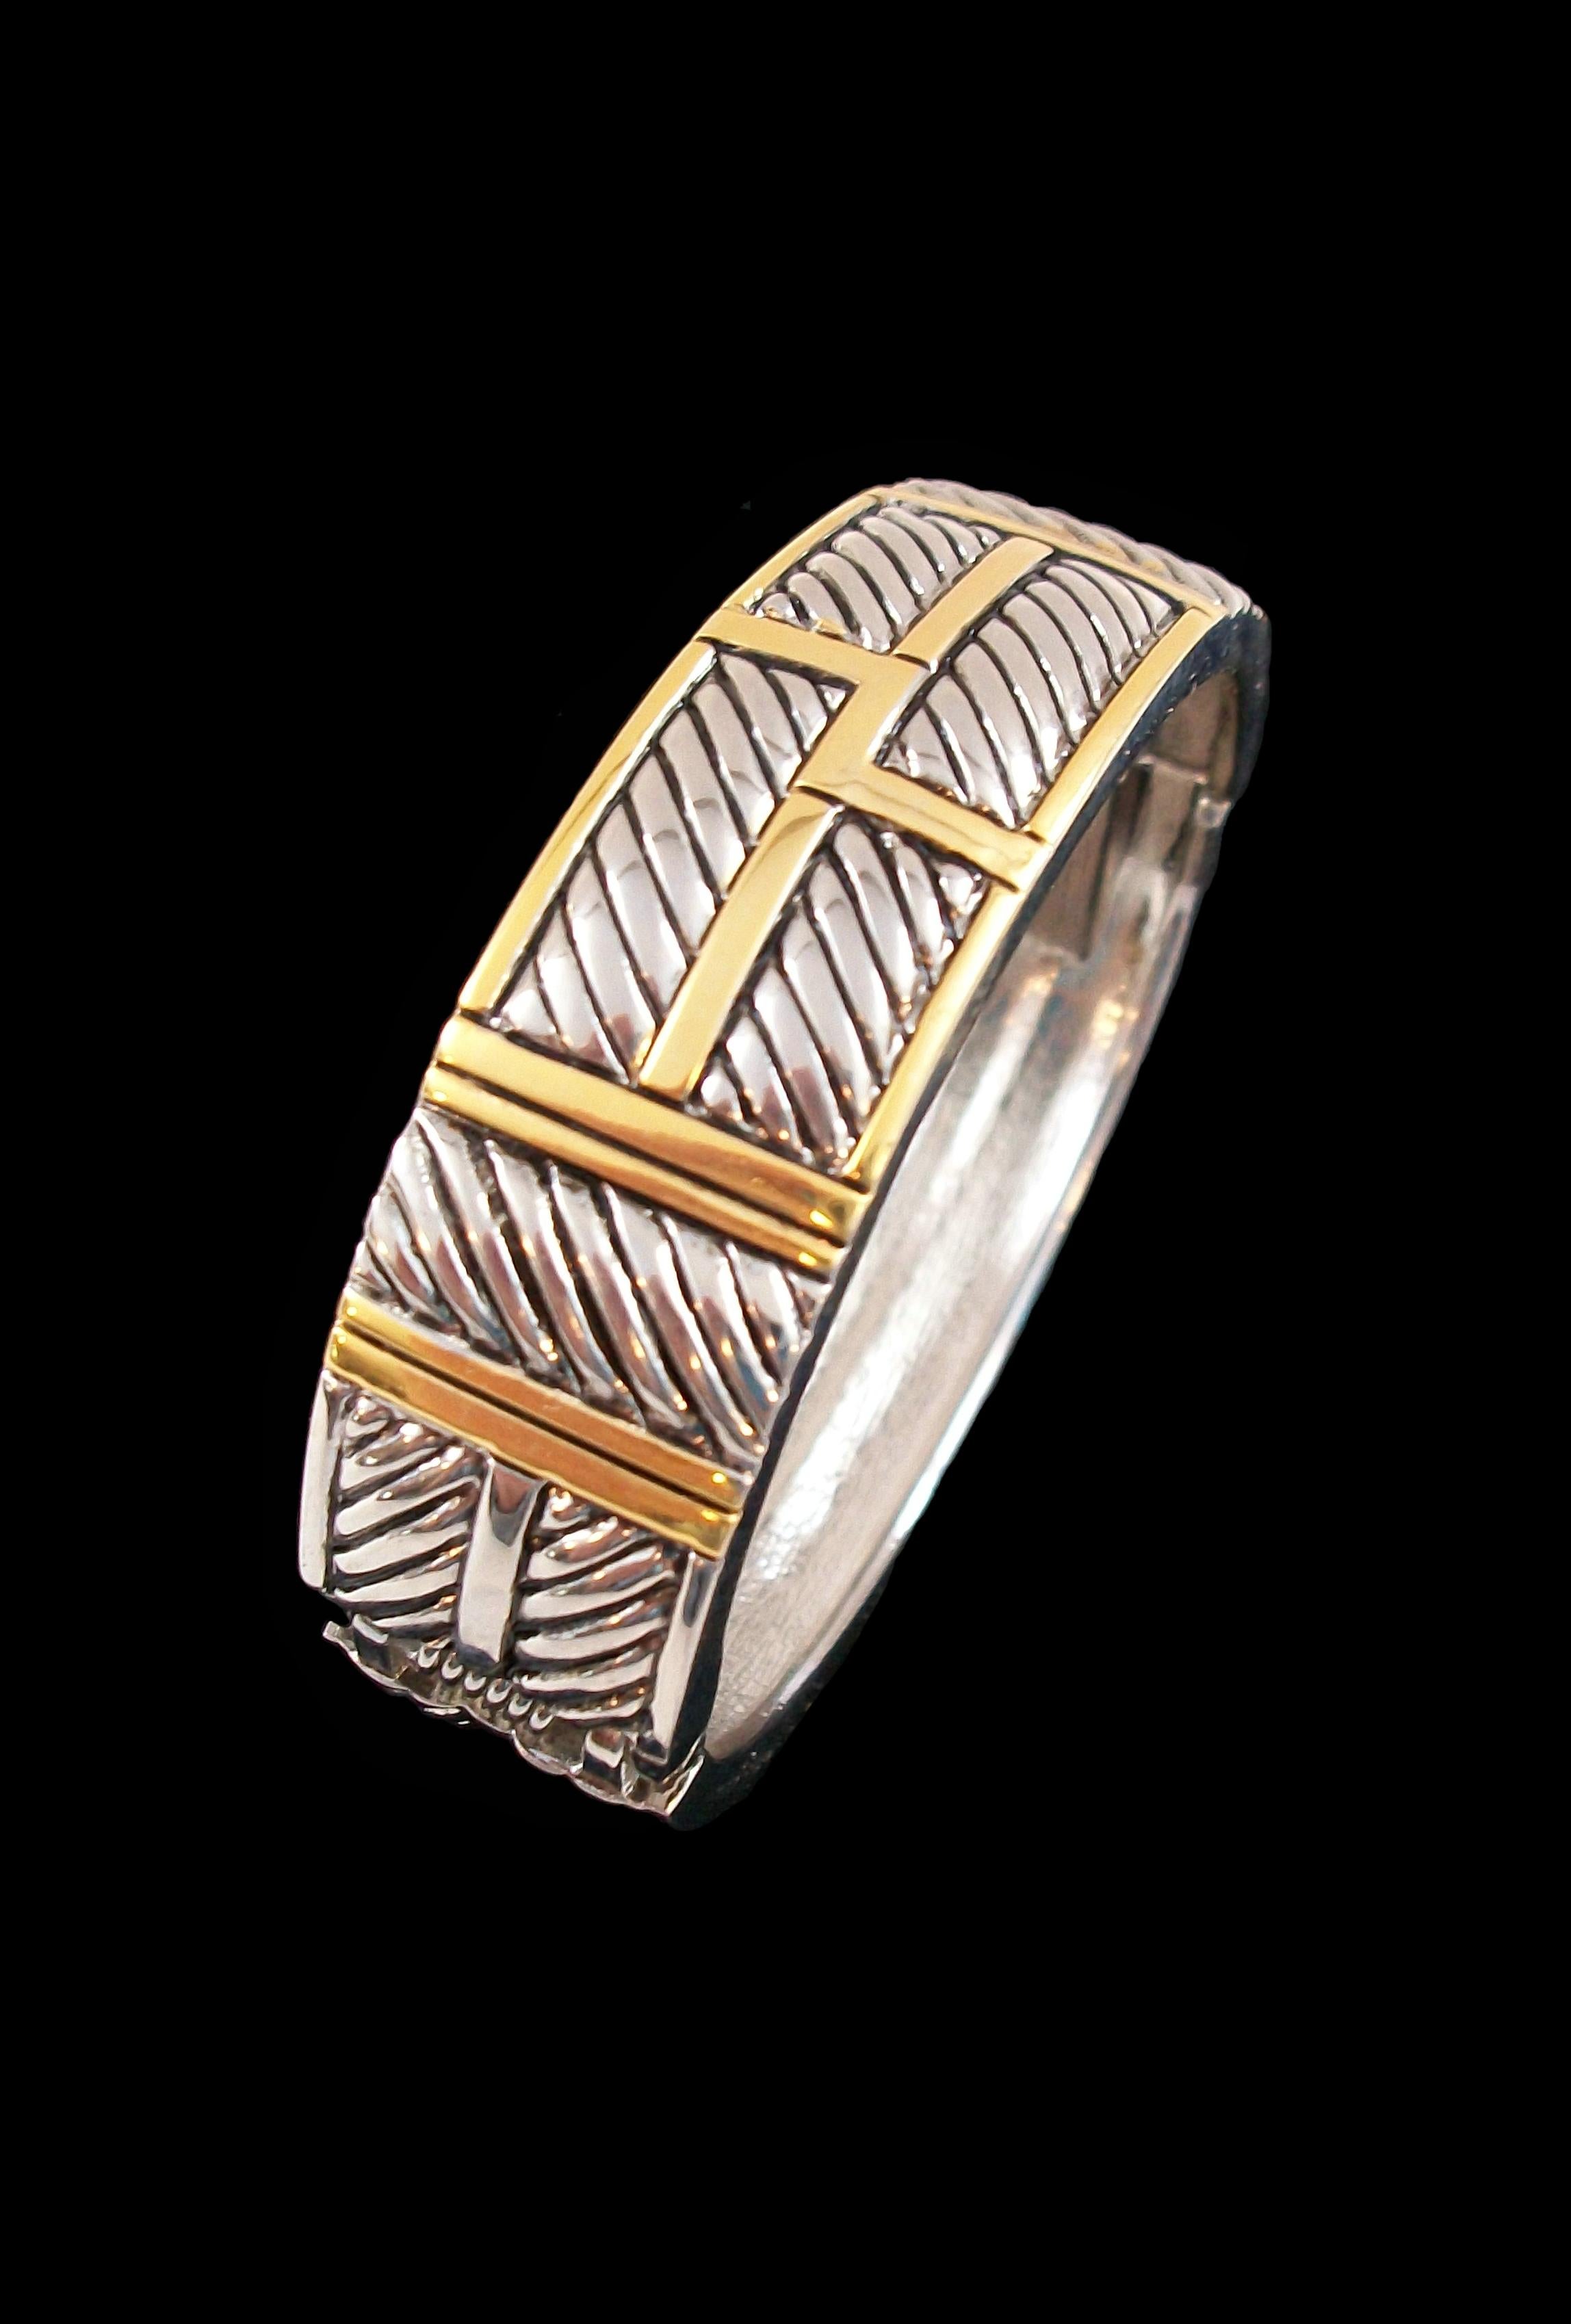 Vintage two tone metal bracelet - hinged clamper bangle design with twisted rope detail - unsigned - circa 1980's.

Excellent vintage condition - minor surface scratches to the metal from age and use - no loss - no damage - no repairs - ready to